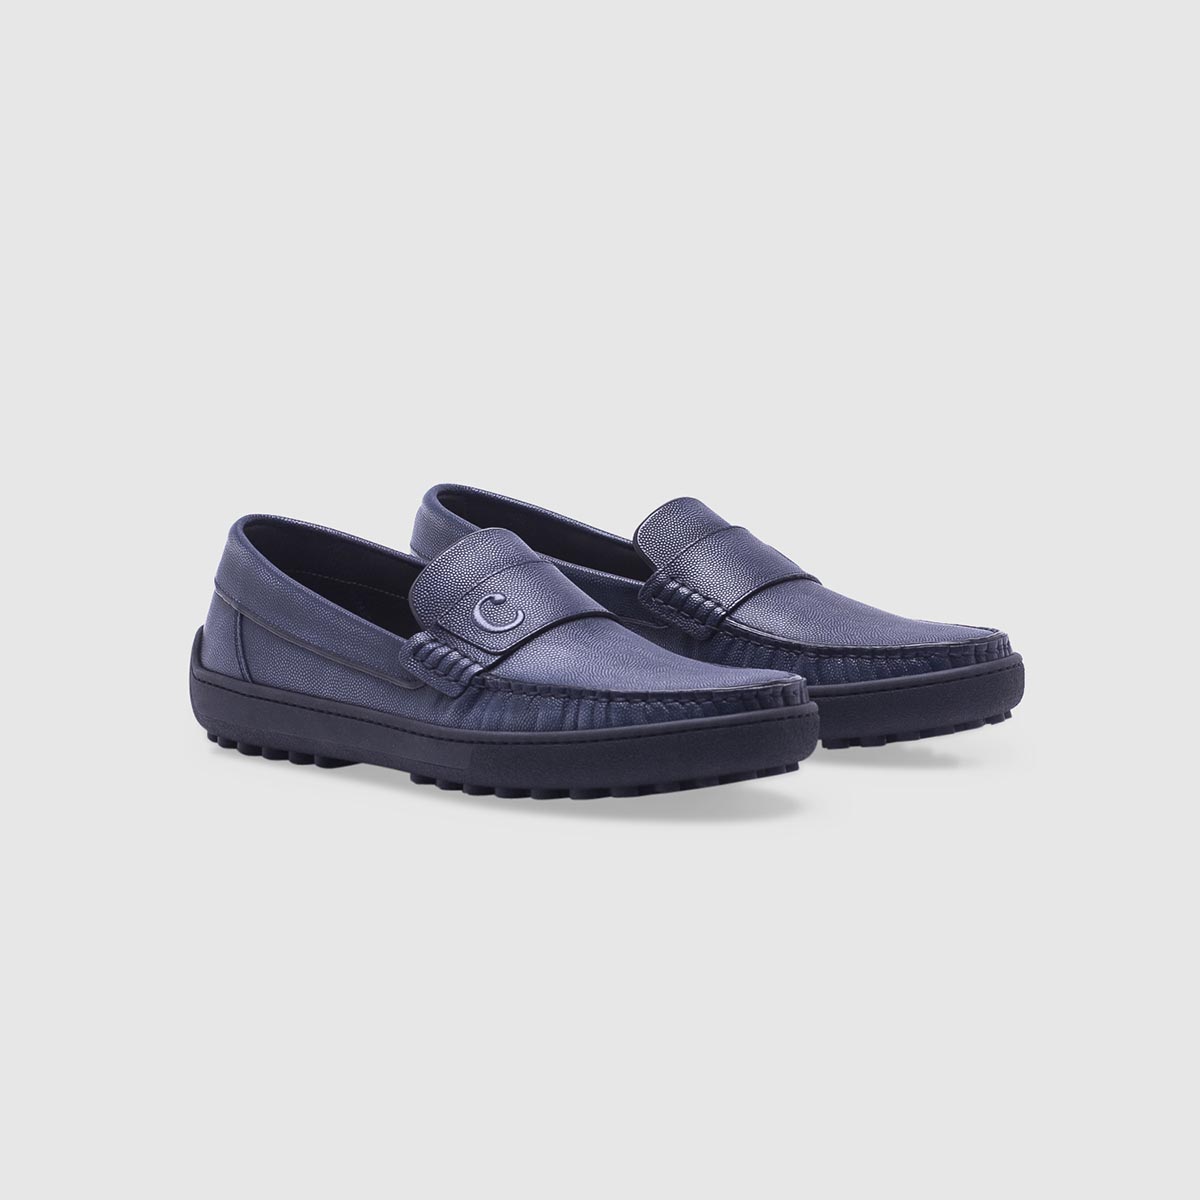 Blue loafer in tumbled calf leather Calò on sale 2022 2